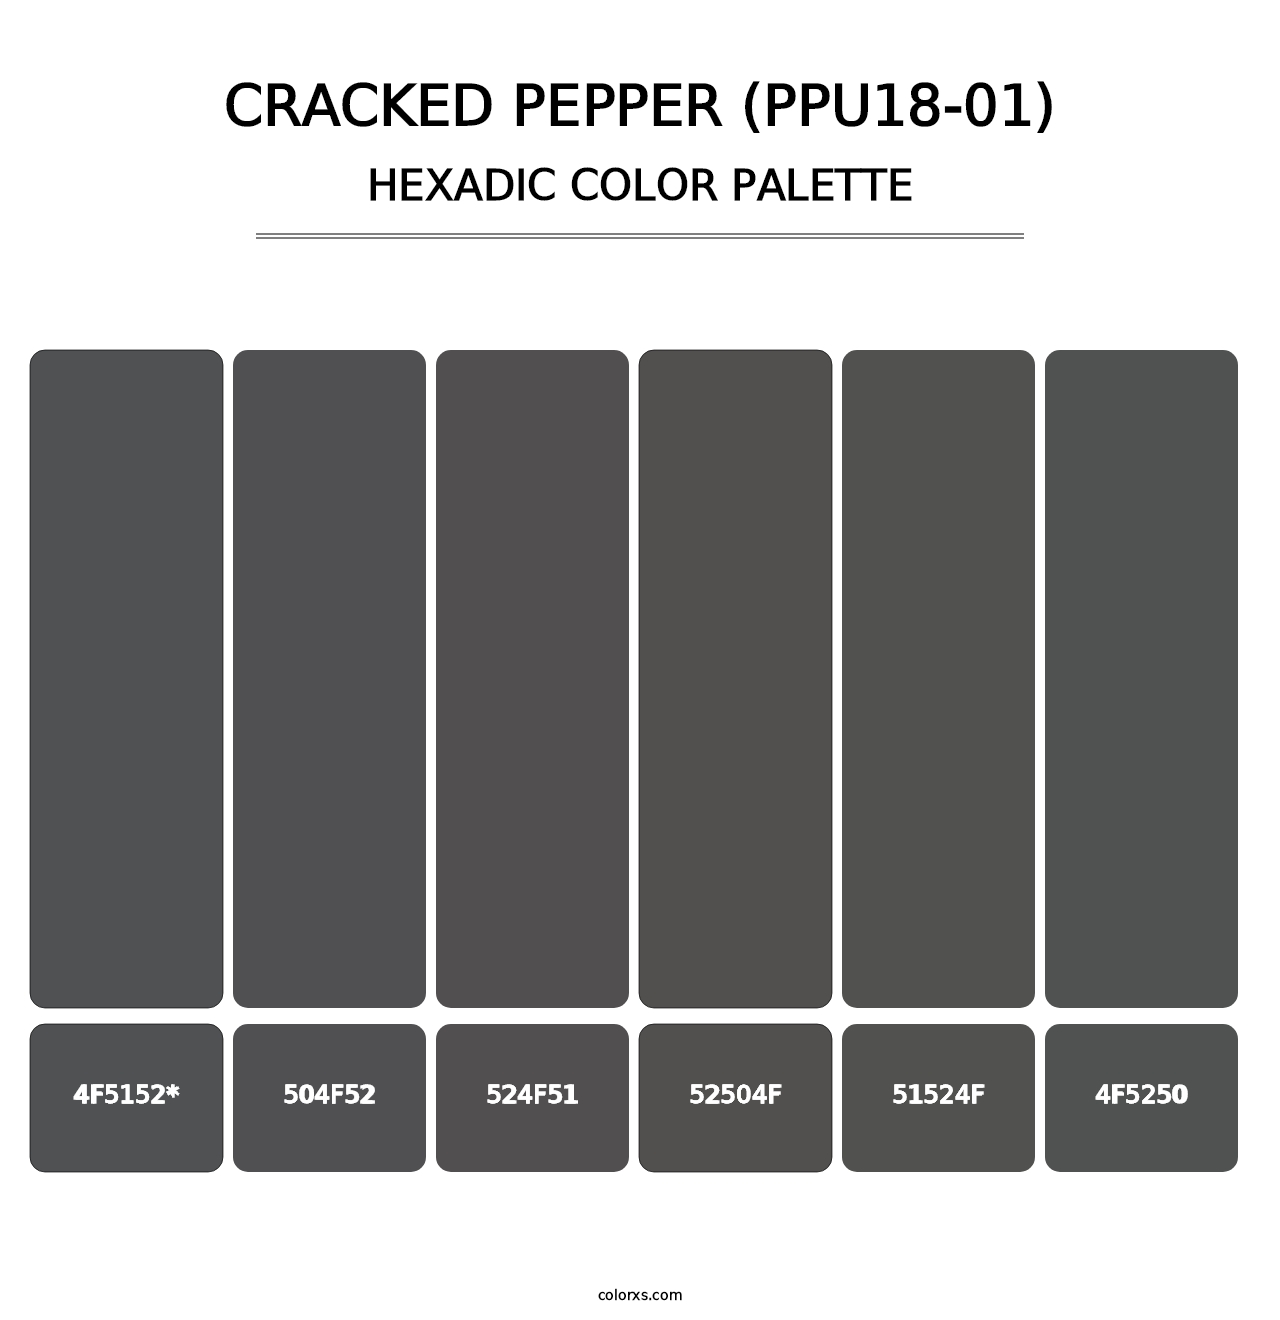 Cracked Pepper (PPU18-01) - Hexadic Color Palette